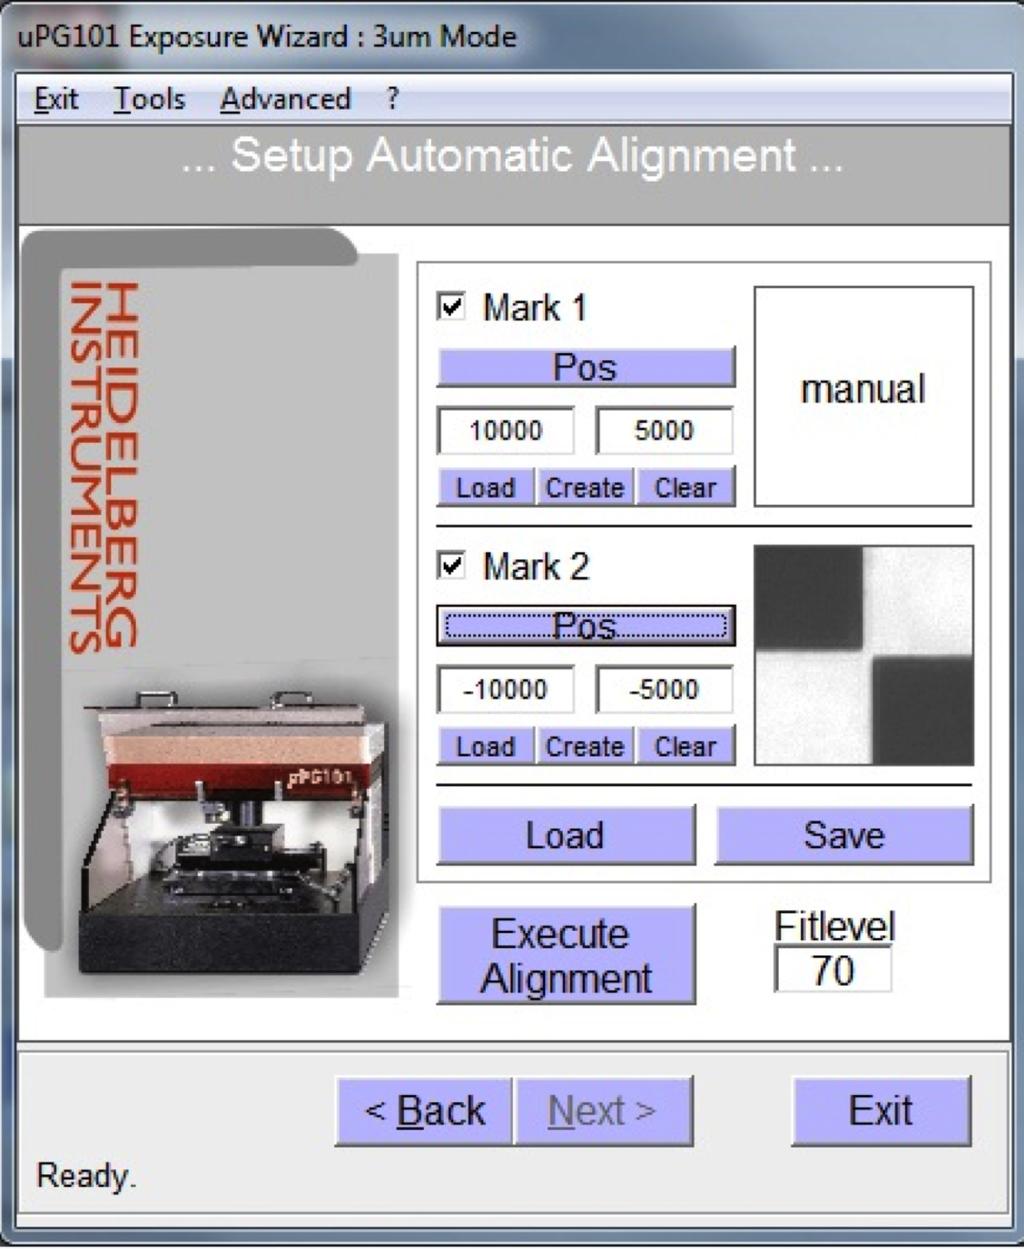 Heidelberg Pattern Generator SOP Page 14 of 15 Revision 2-080812 Figure 11, Setup Automatic Alignment 9.1.2 9.1.3 Option, Advanced Alignment - Contact staff to assist using Advanced alignment, see (insert ref) 9.